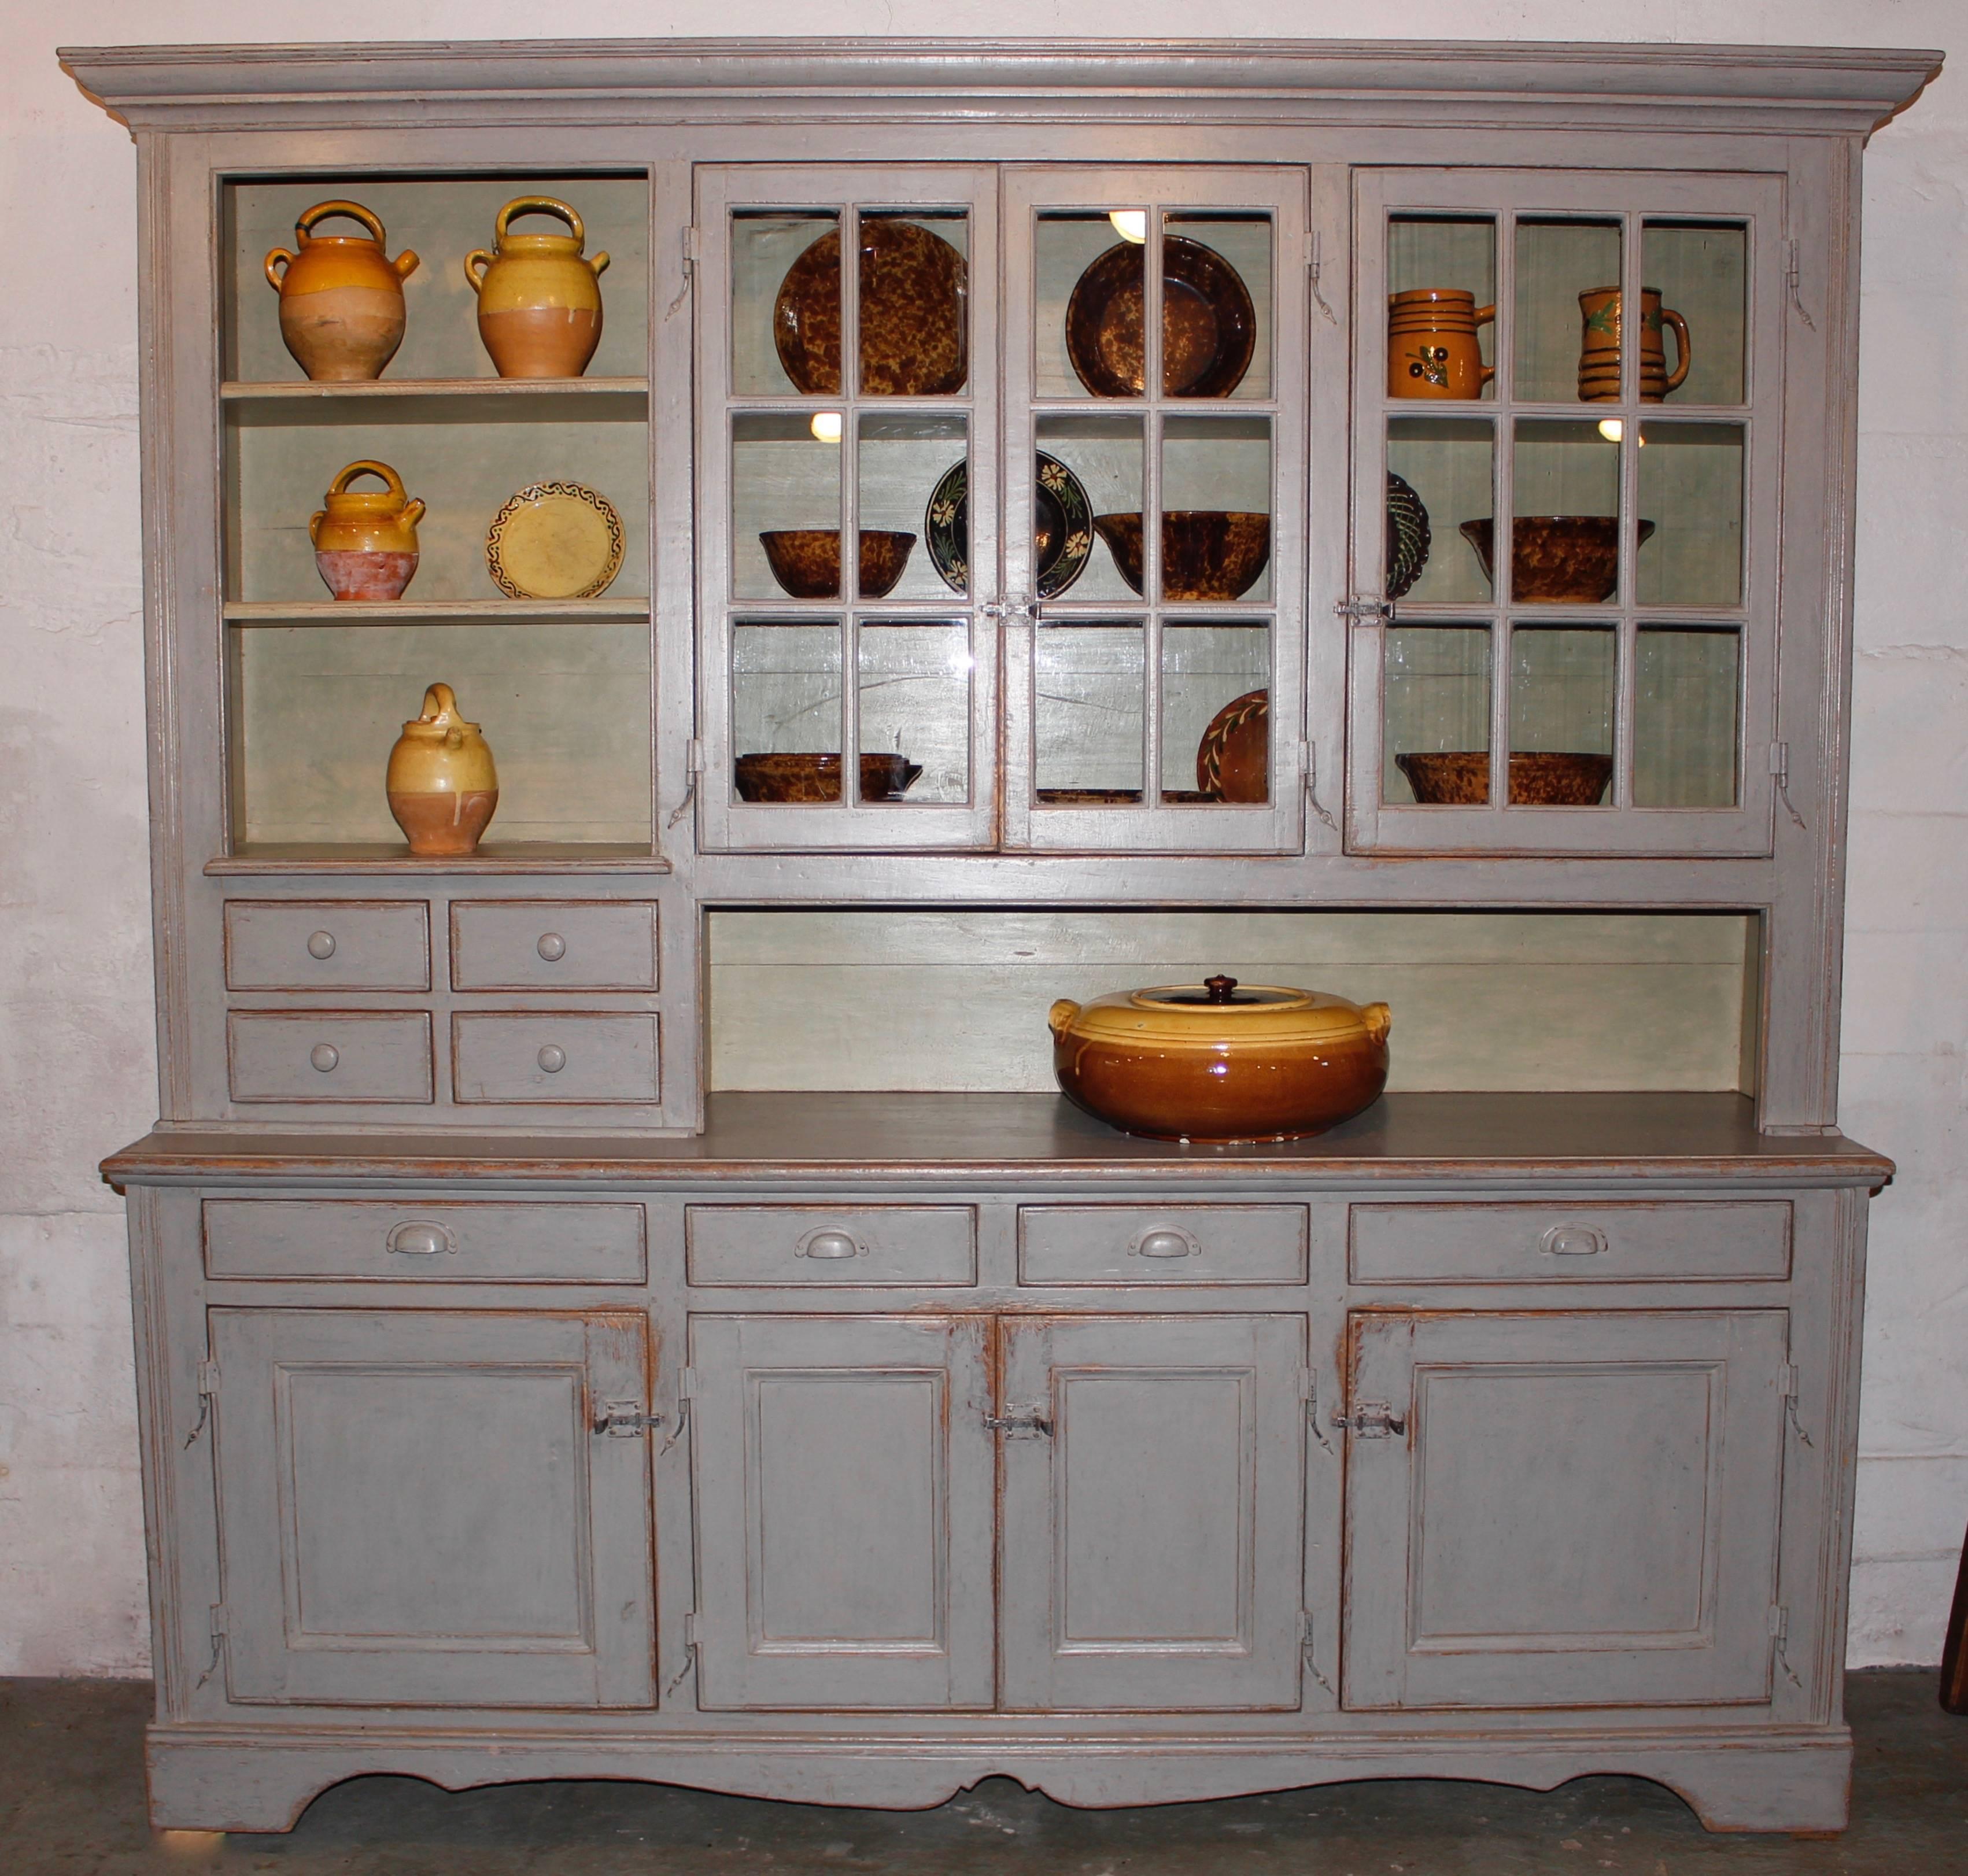 A setback cupboard found in Quebec. It has plenty of storage with doors and drawers and open shelving to display pottery, dishes or art work.